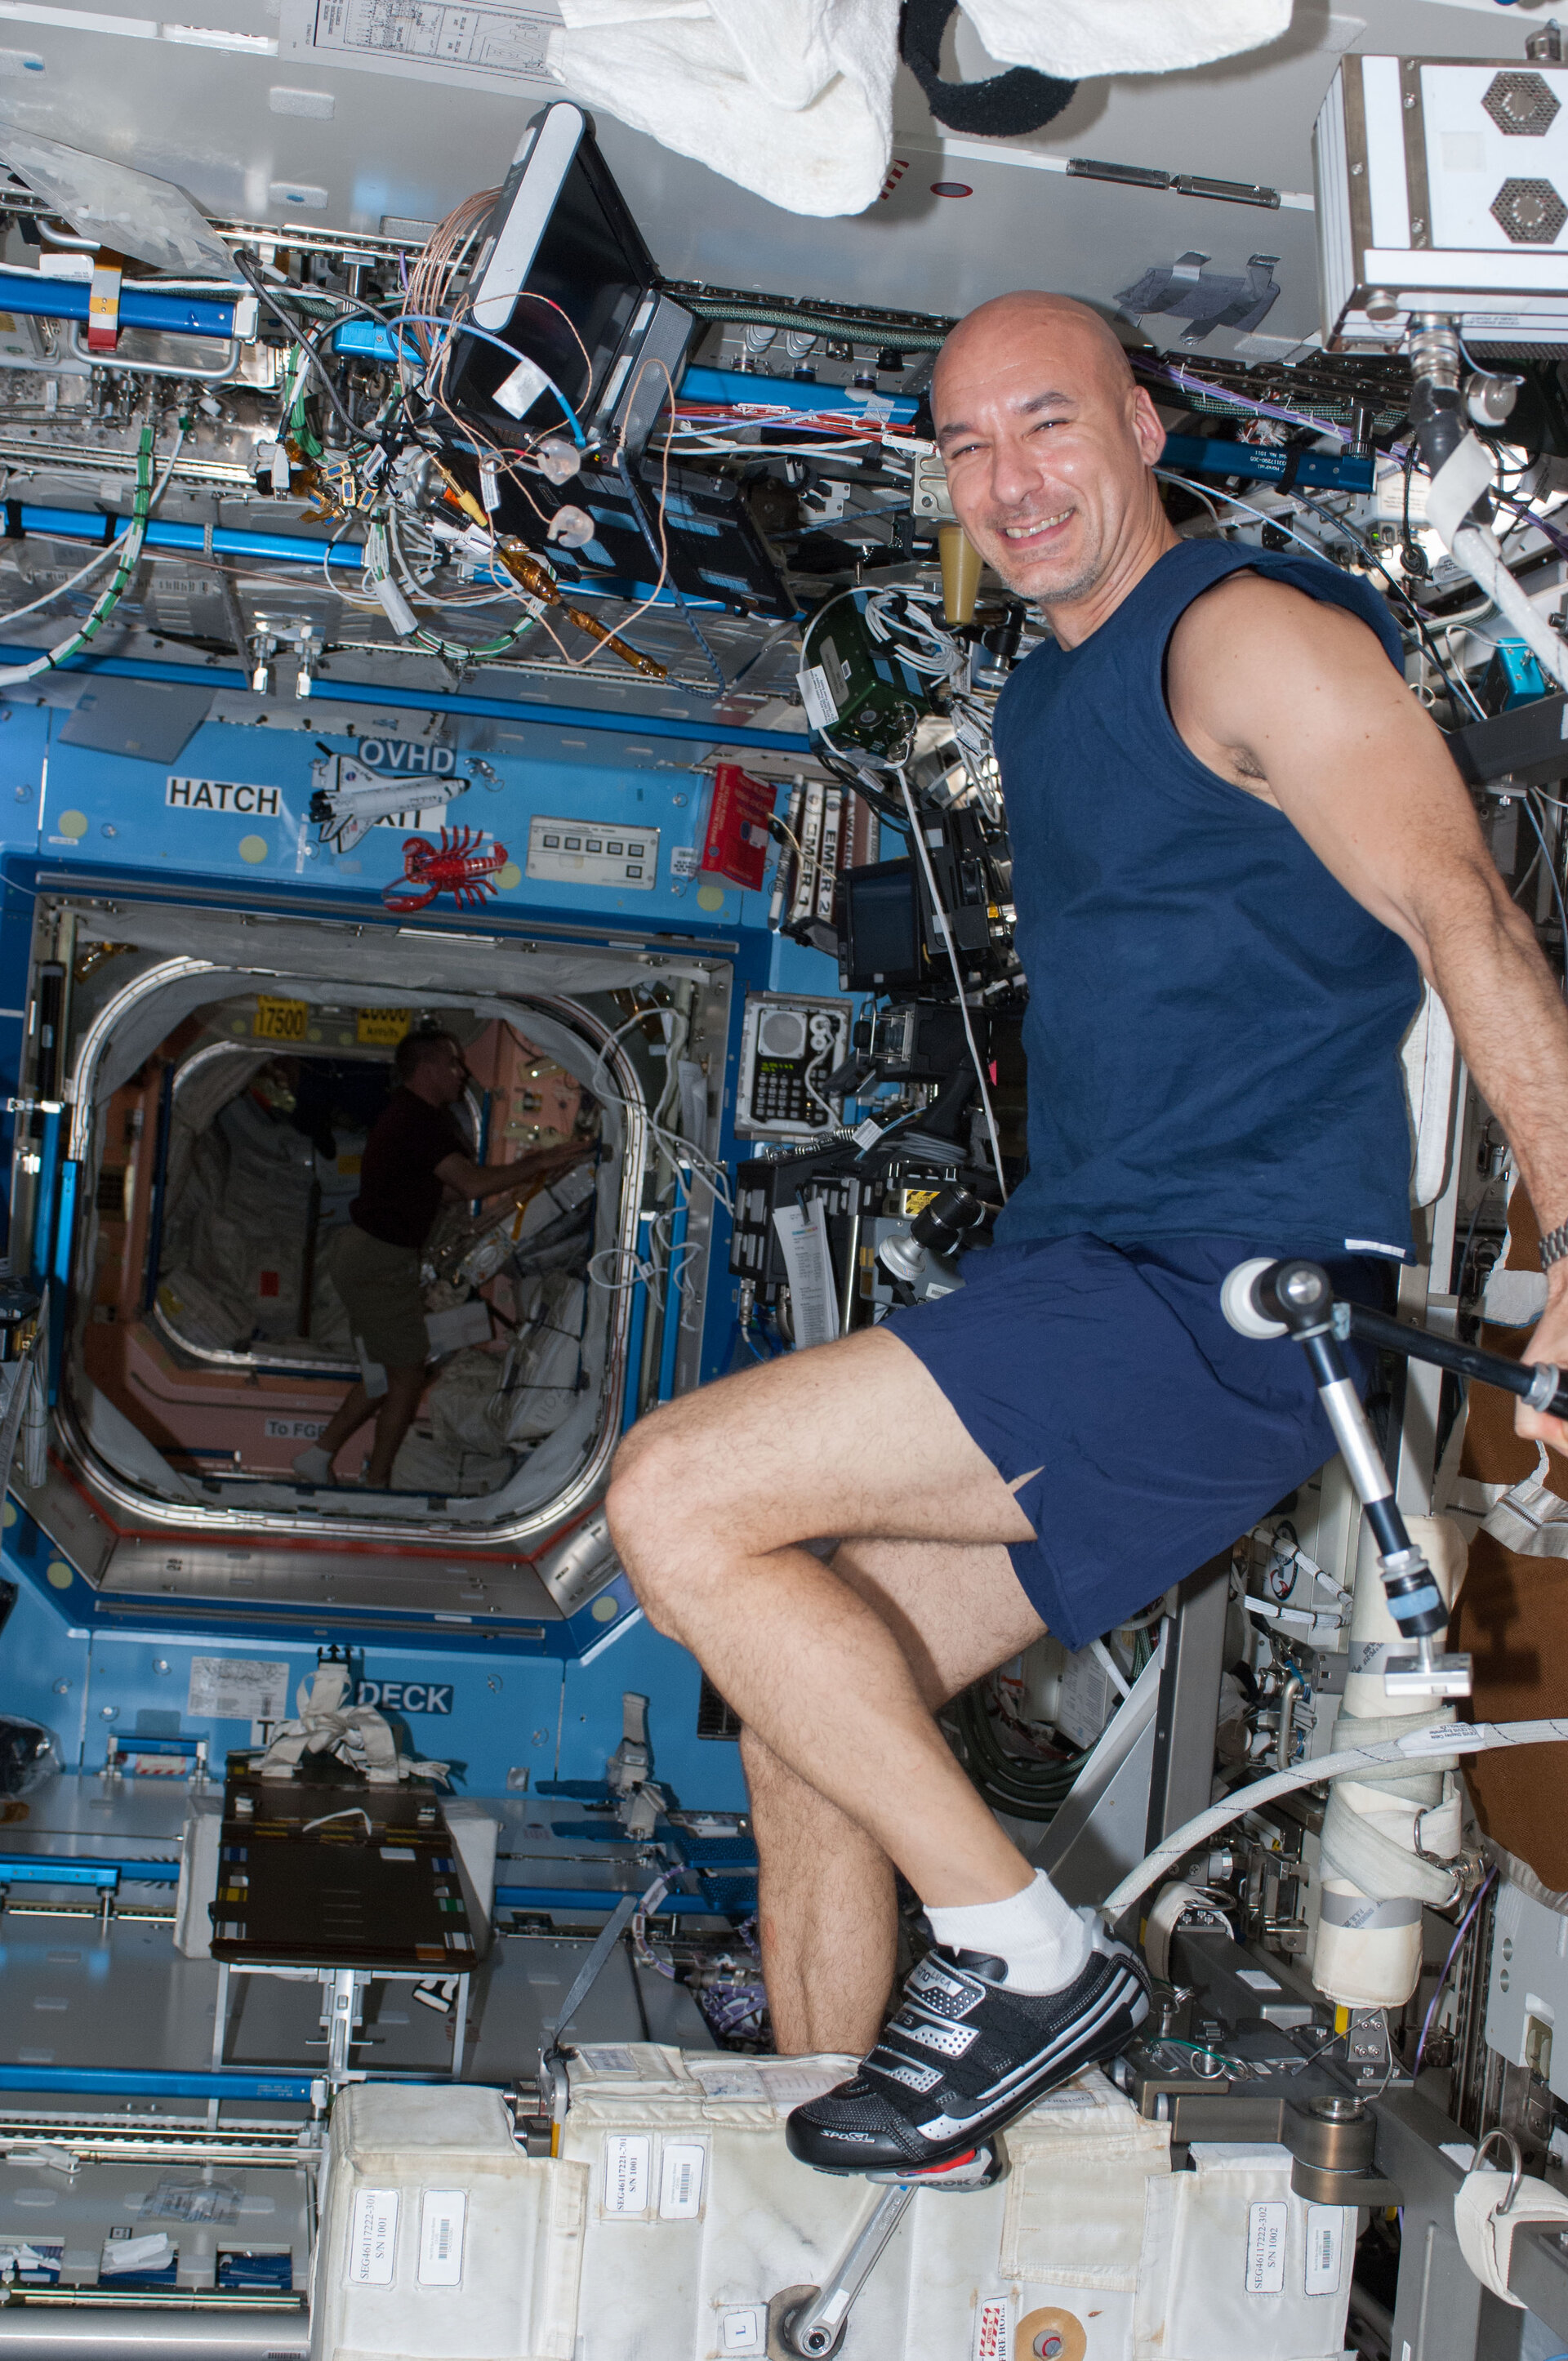 Keeping fit in space